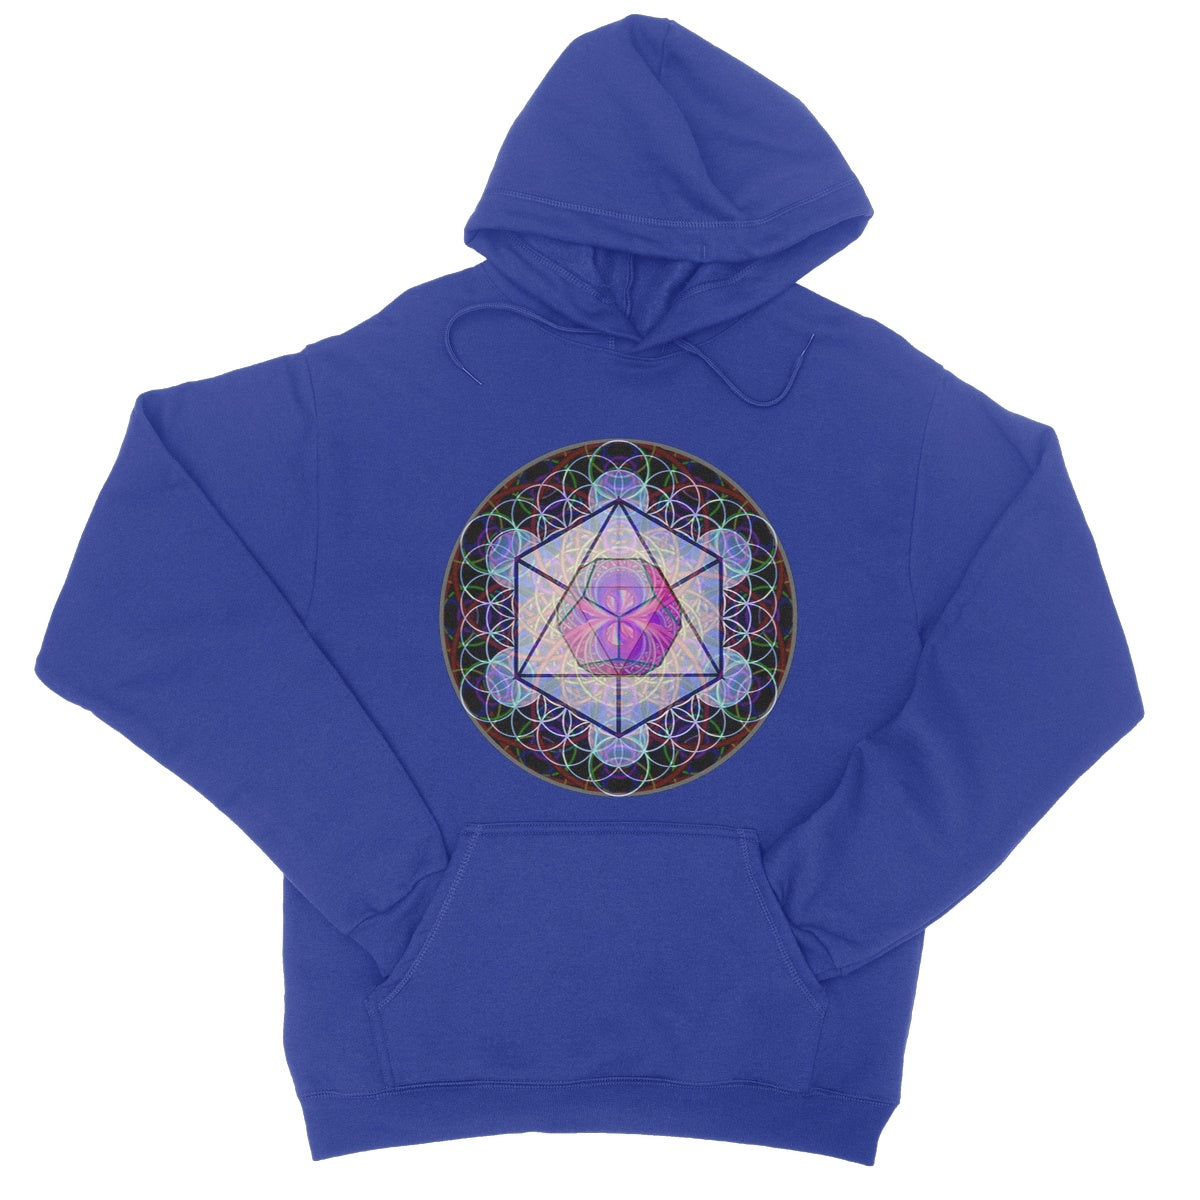 The Platonic Solid Dodecahedron College Hoodie